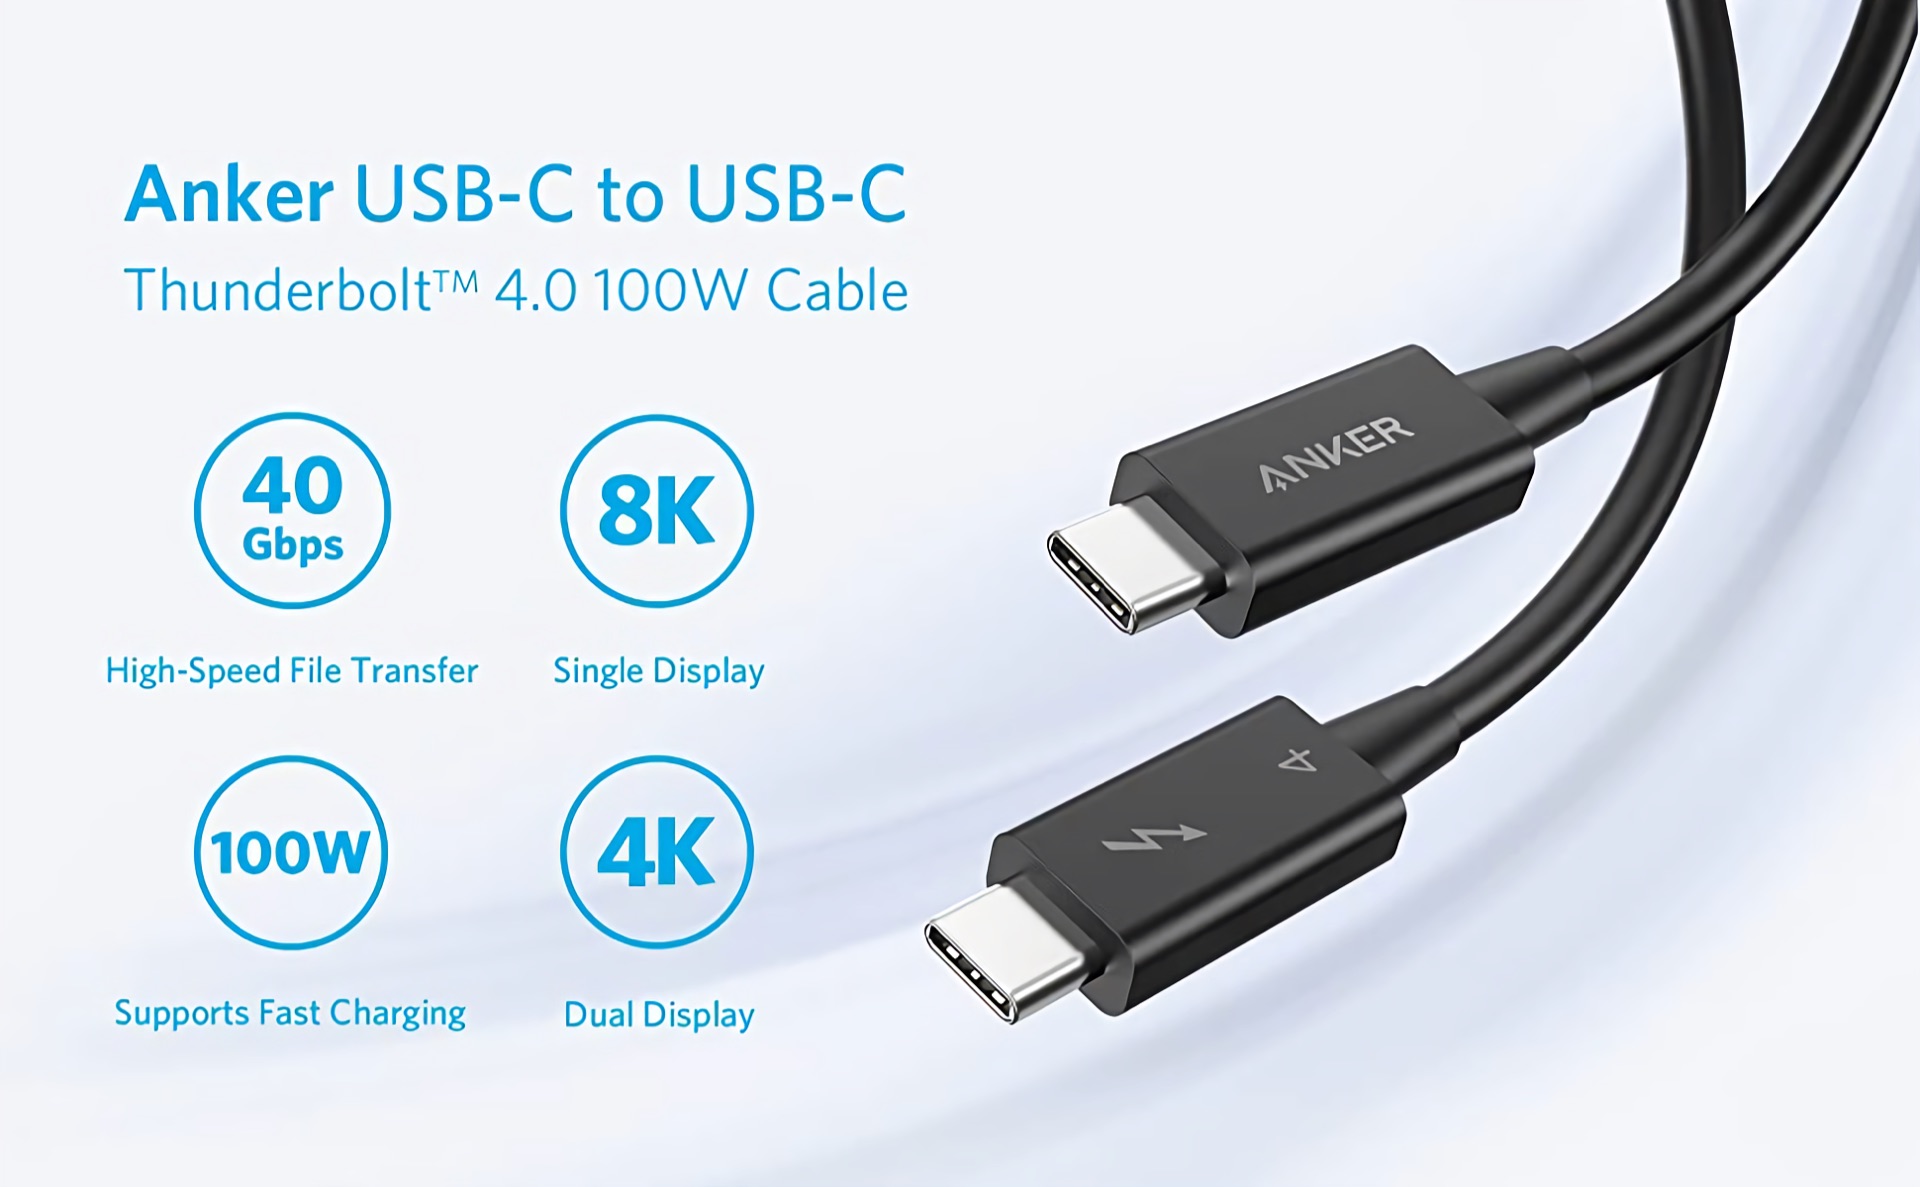 Anker USB-C to USB-C Thunderbolt 4.0 100W Cable